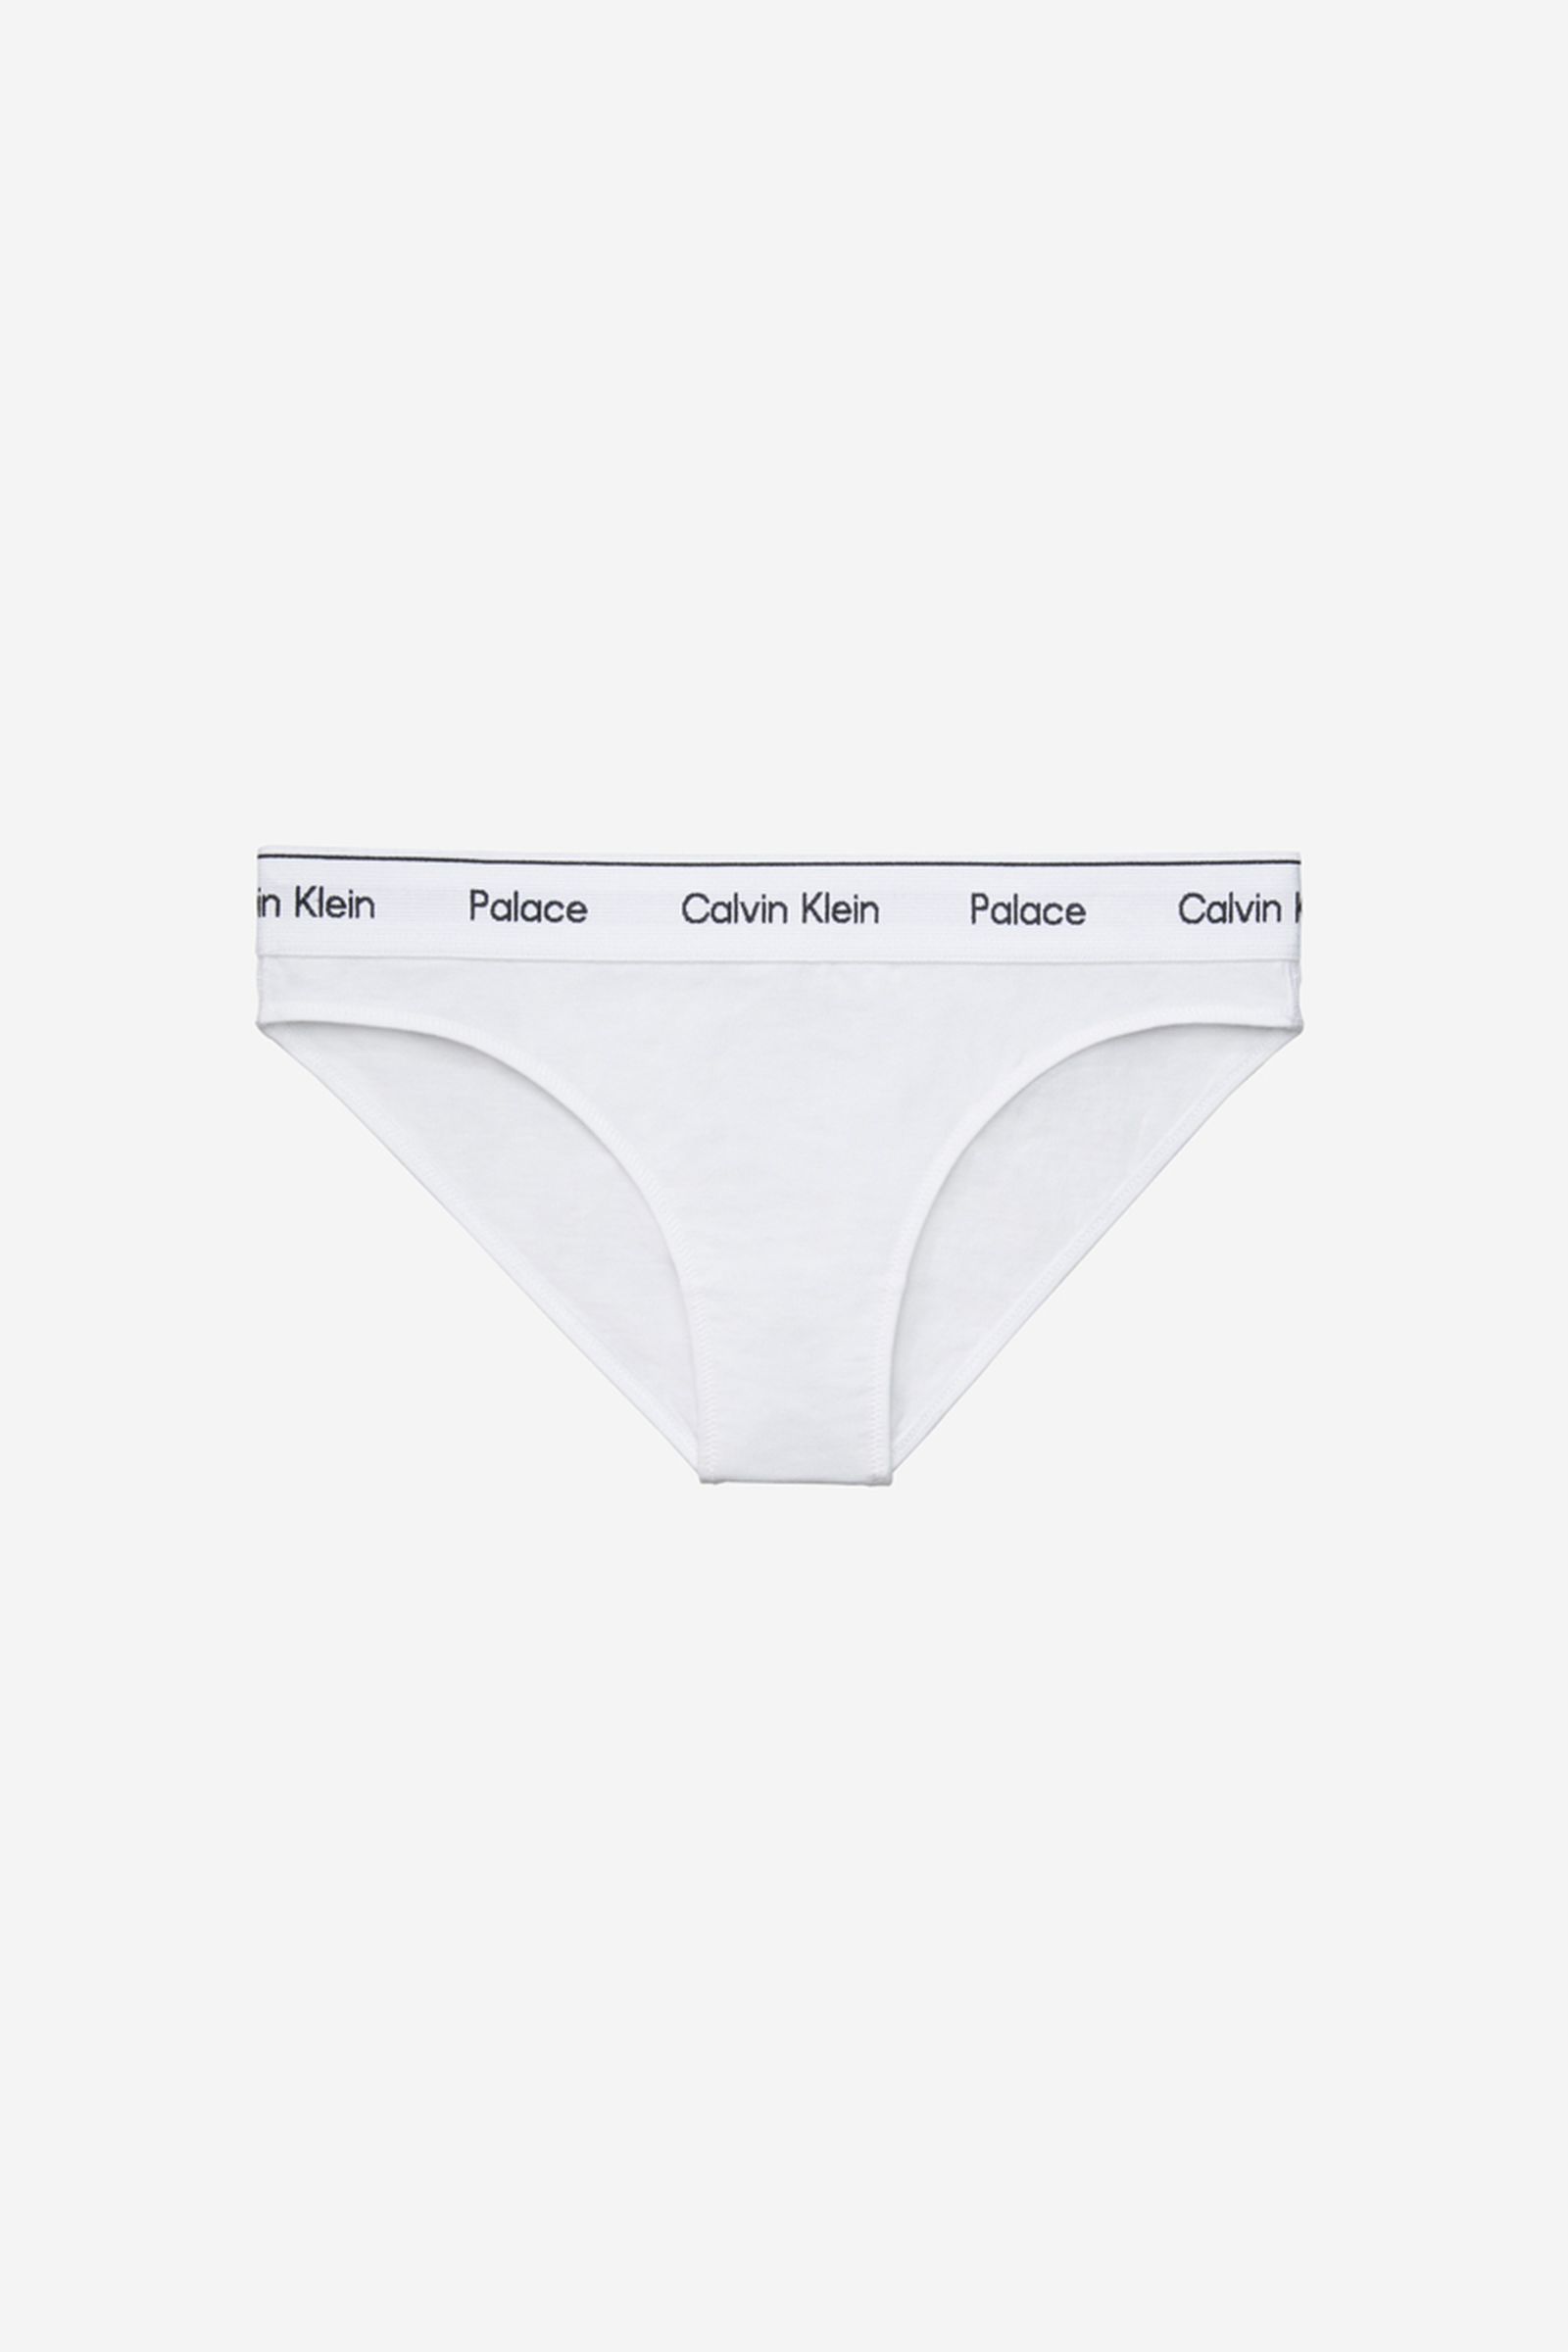 palace-calvin-klein-collab-collection-price-underwear-release-date (15)